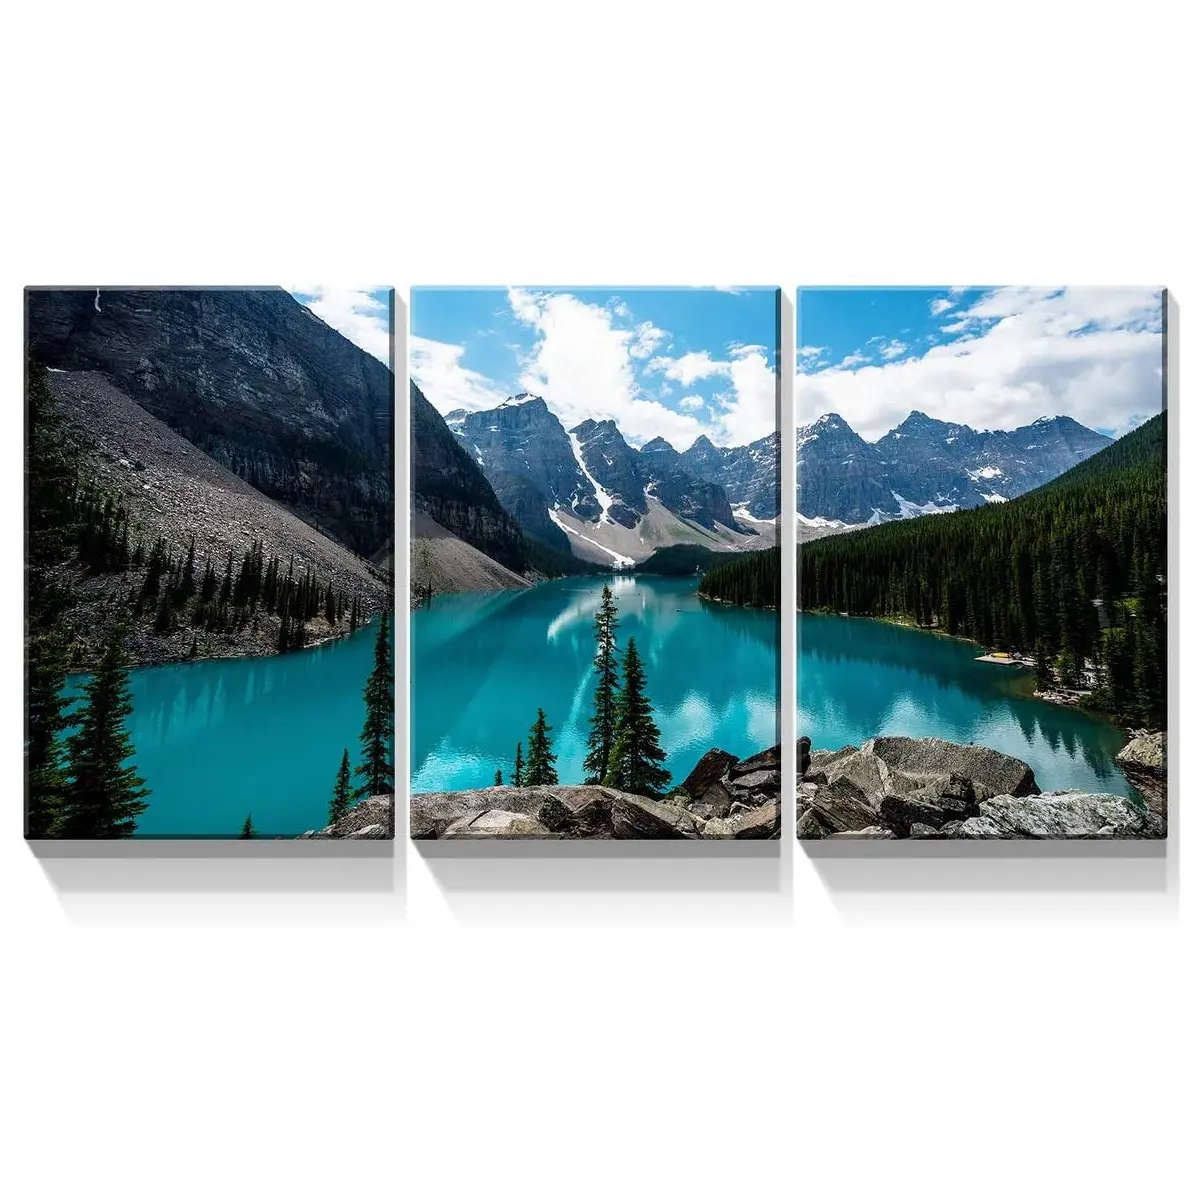 Landscape Turquoise Lake and Mountain 3 Panel Oil Painting Wall Art Modern Painting For Living Room decor canvas for painting